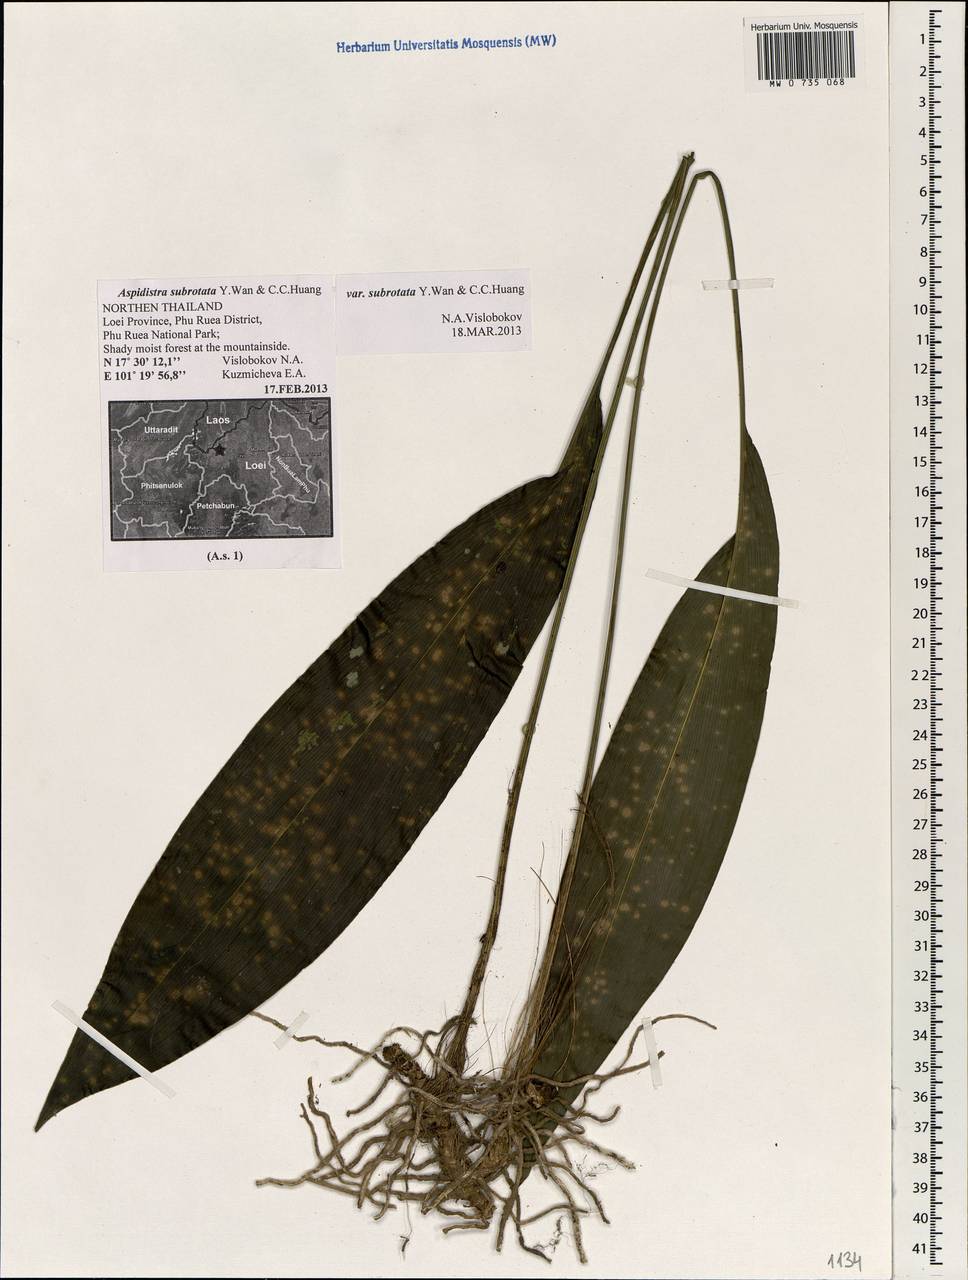 Aspidistra subrotata Y.Wan & C.C.Huang, South Asia, South Asia (Asia outside ex-Soviet states and Mongolia) (ASIA) (Thailand)